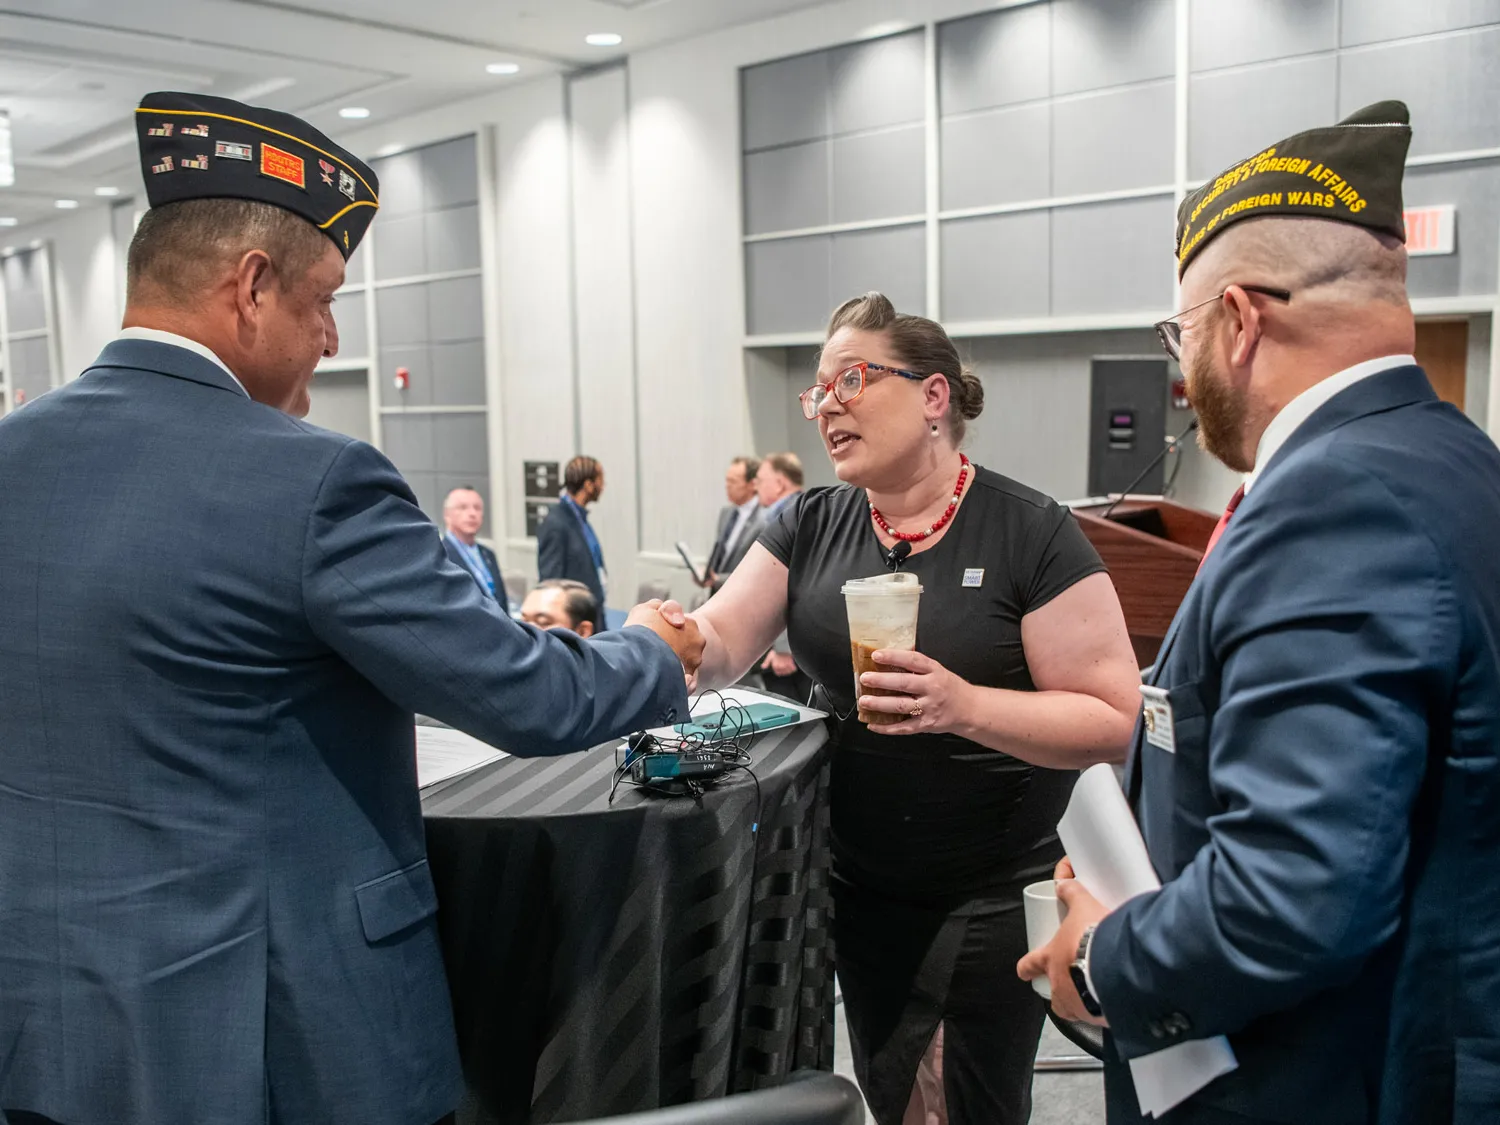 At a table on a small stage, Gretchen Klingler, a white woman with a style reminiscent of the 1940s, leans across a table to shake hands with a white man wearing an American Legion uniform cap and a suit. They’re making eye contact, and next to them smiling is a white man in a suit, this one with a VFW uniform cap. 